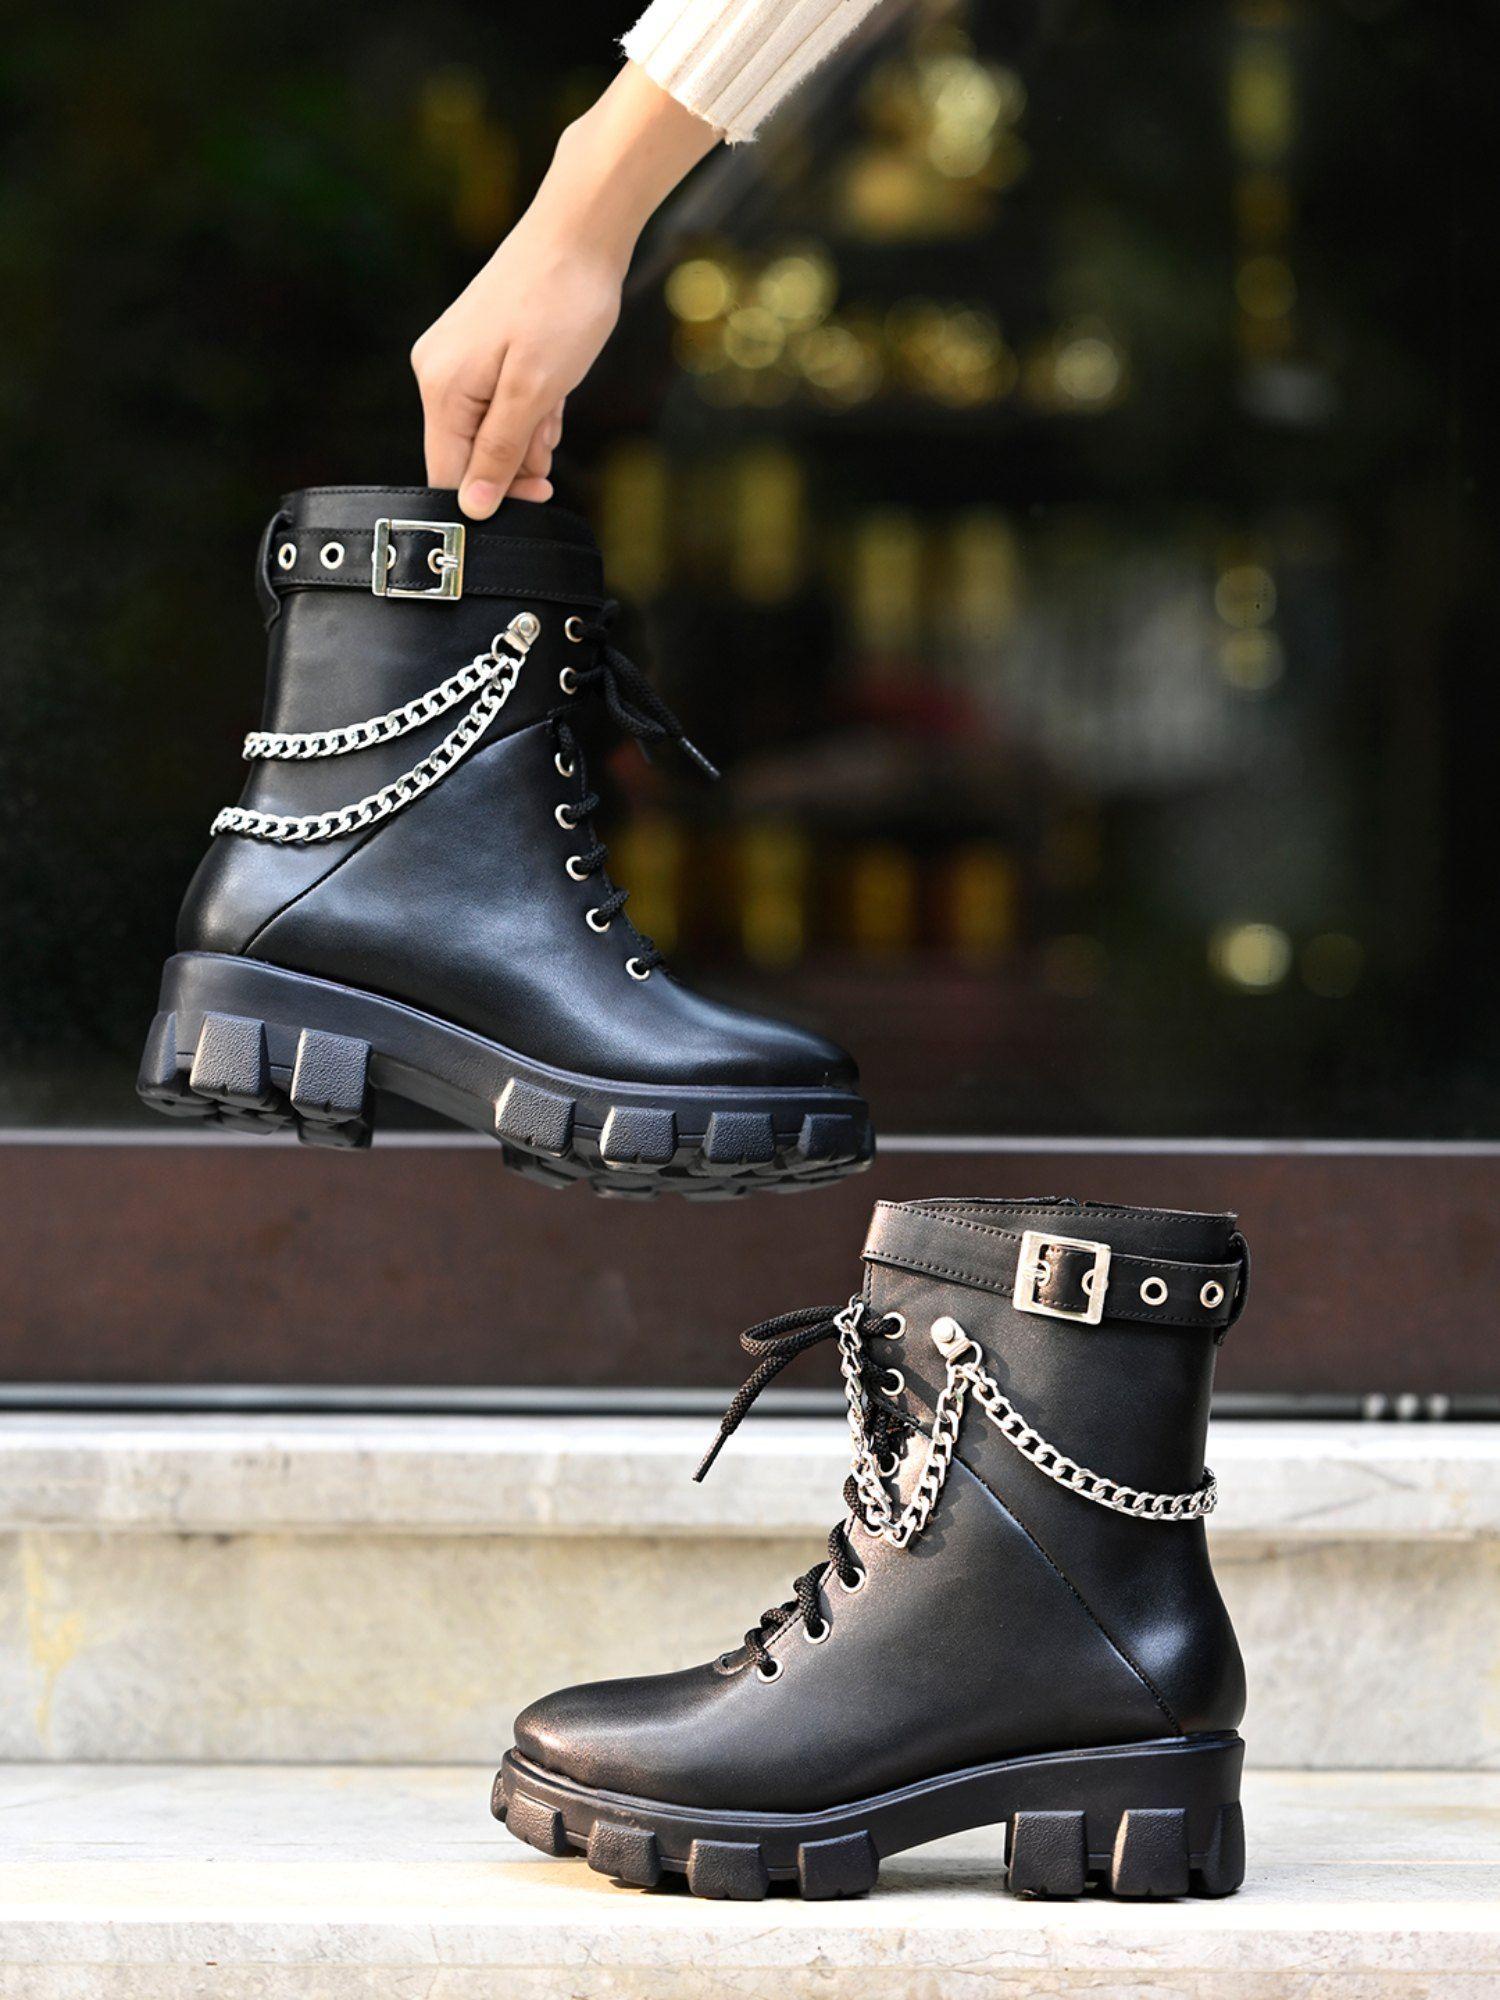 silver-plain-cool-chain-detailed-black-ankle-boots-for-girls